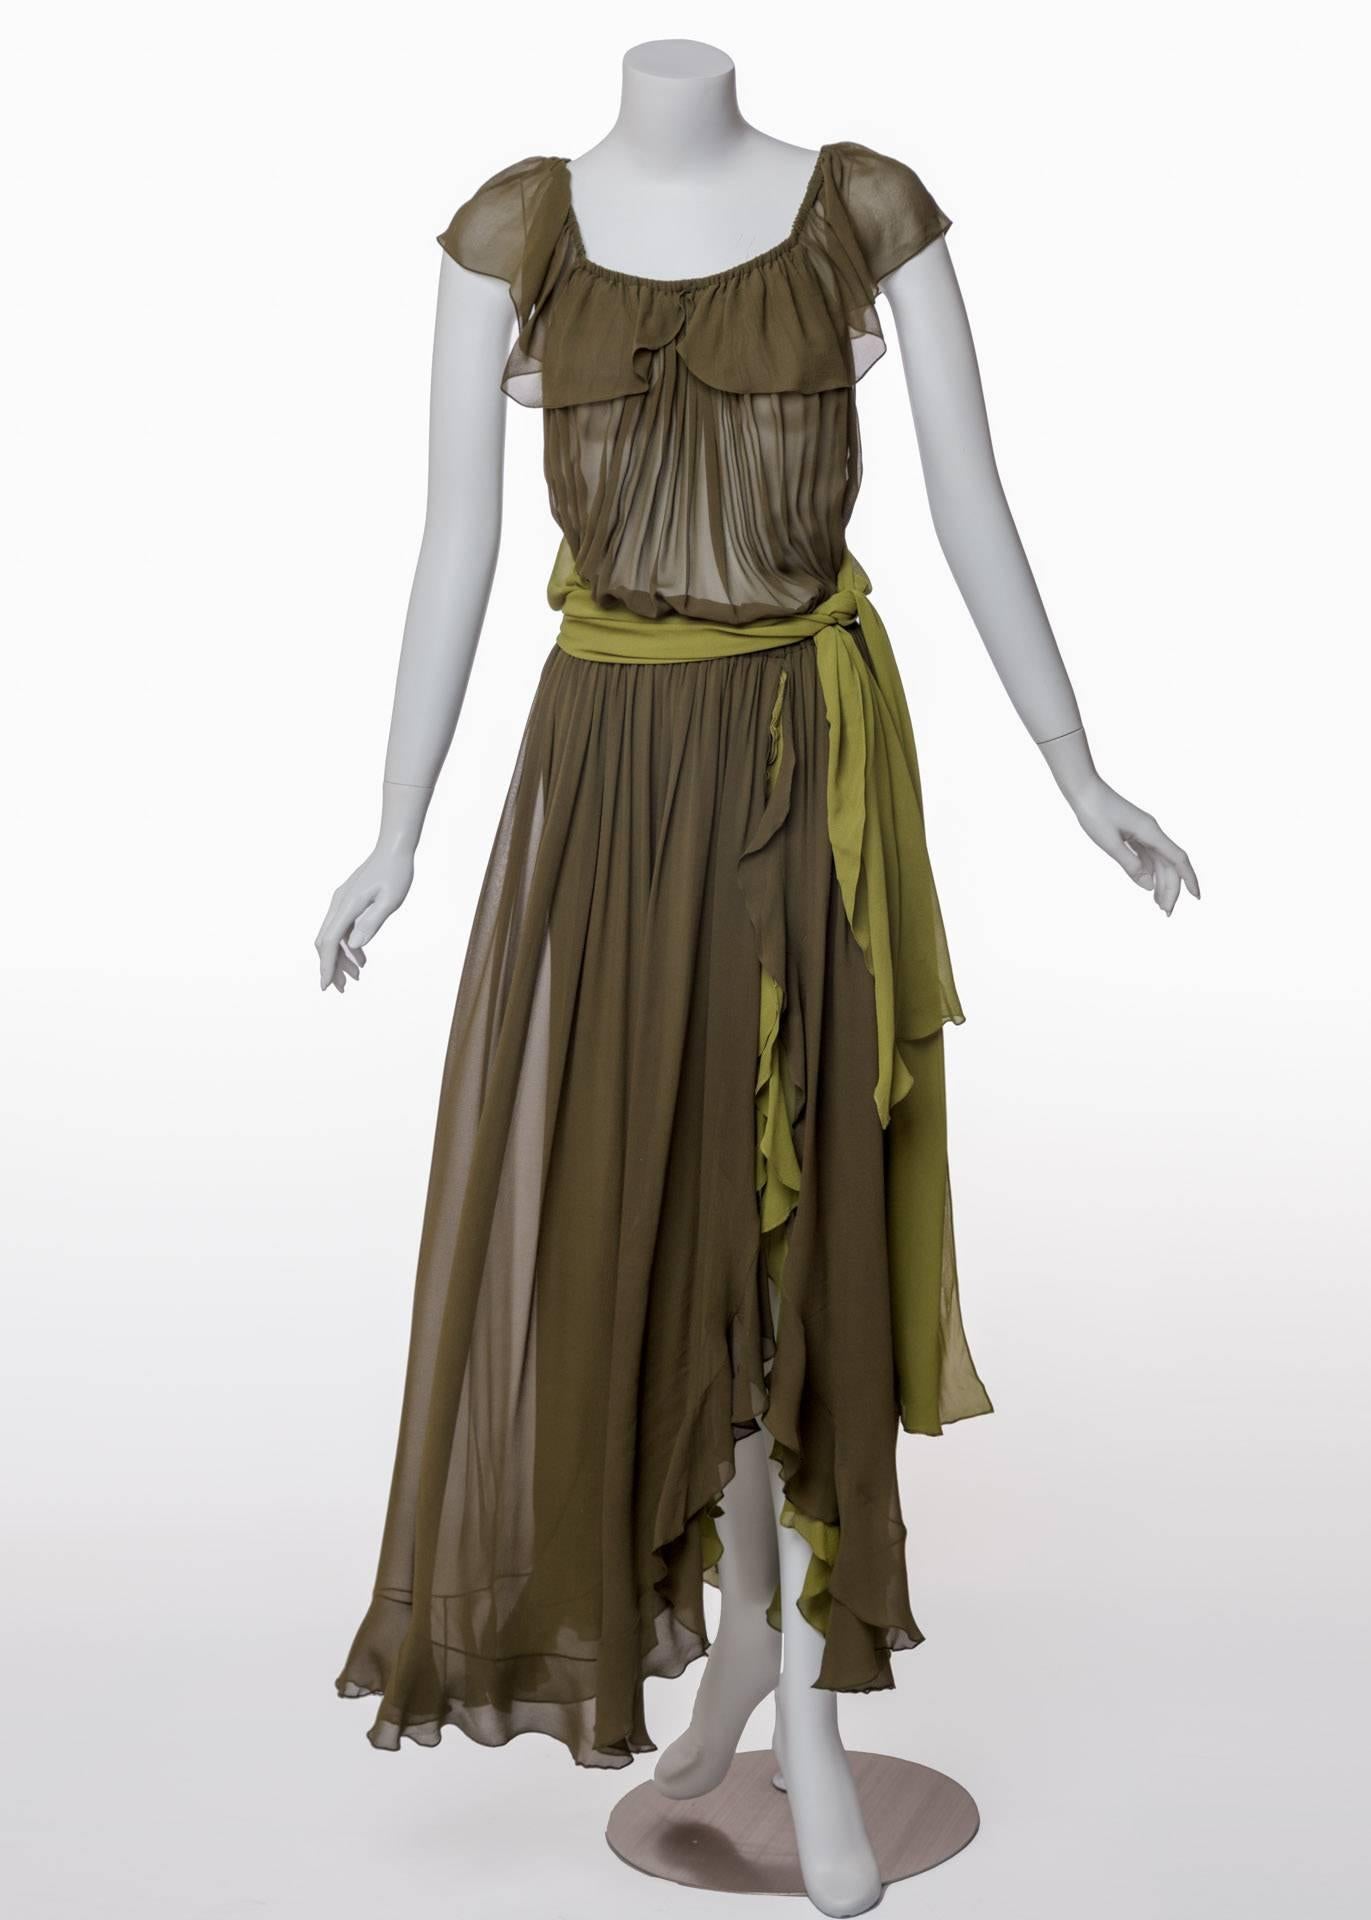 A swirl of romantic ruffles in two hues of gorgeous green silk chiffon makes this Yves Saint Laurent evening gown an ultra-pretty find from the past. Soft and flowing, the dress is embellished by a deep flounce that trims the scooped neckline, side